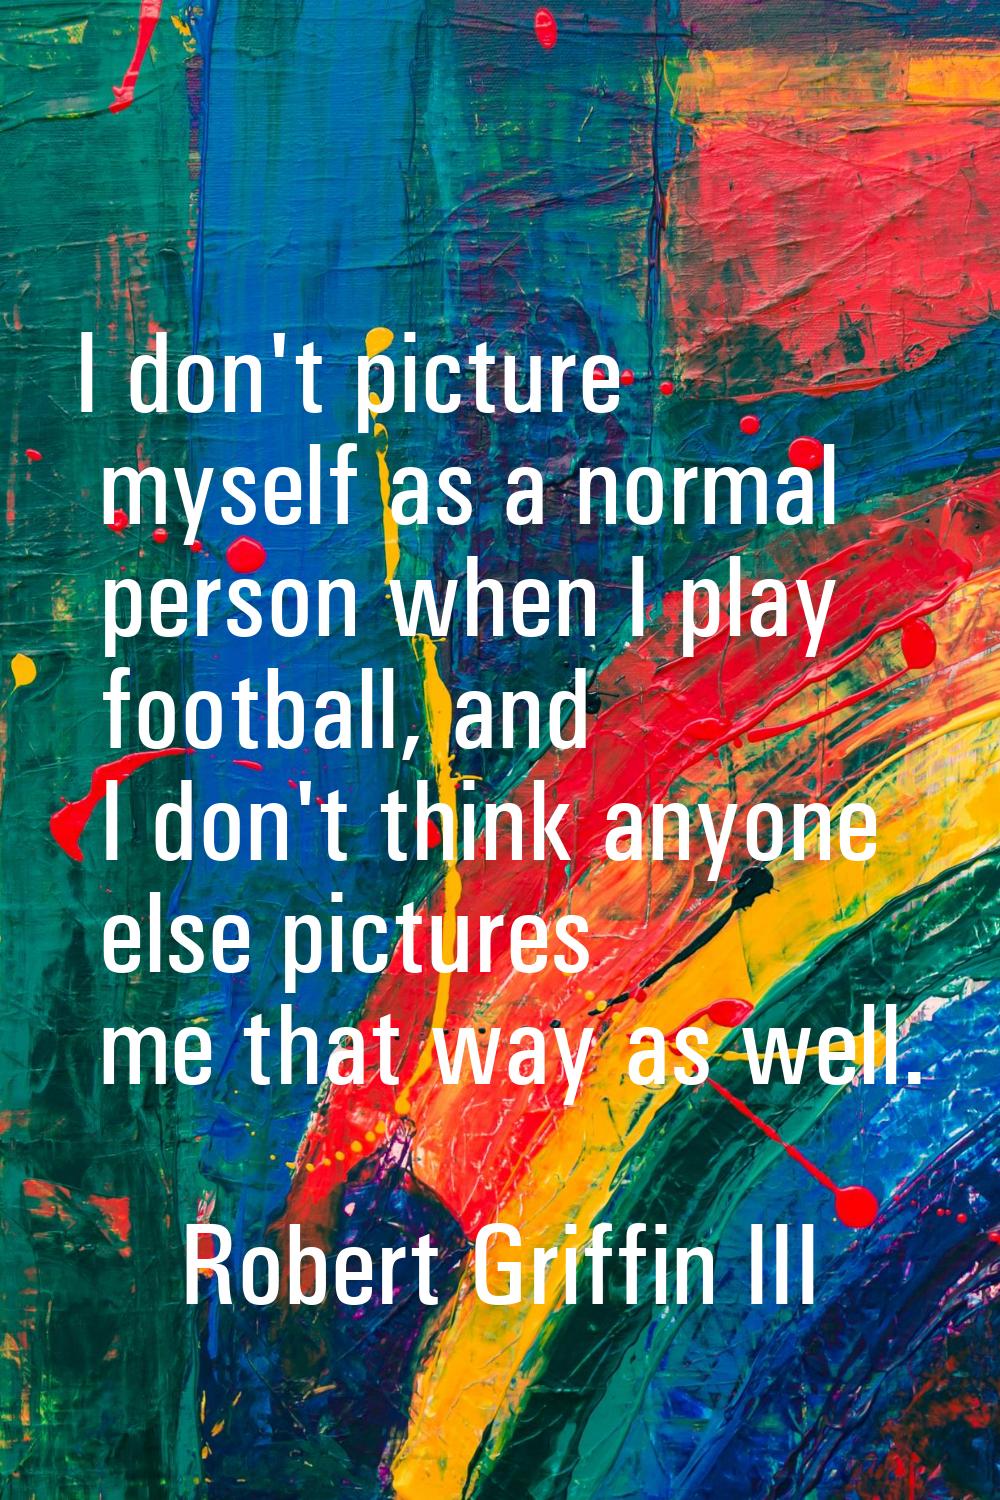 I don't picture myself as a normal person when I play football, and I don't think anyone else pictu